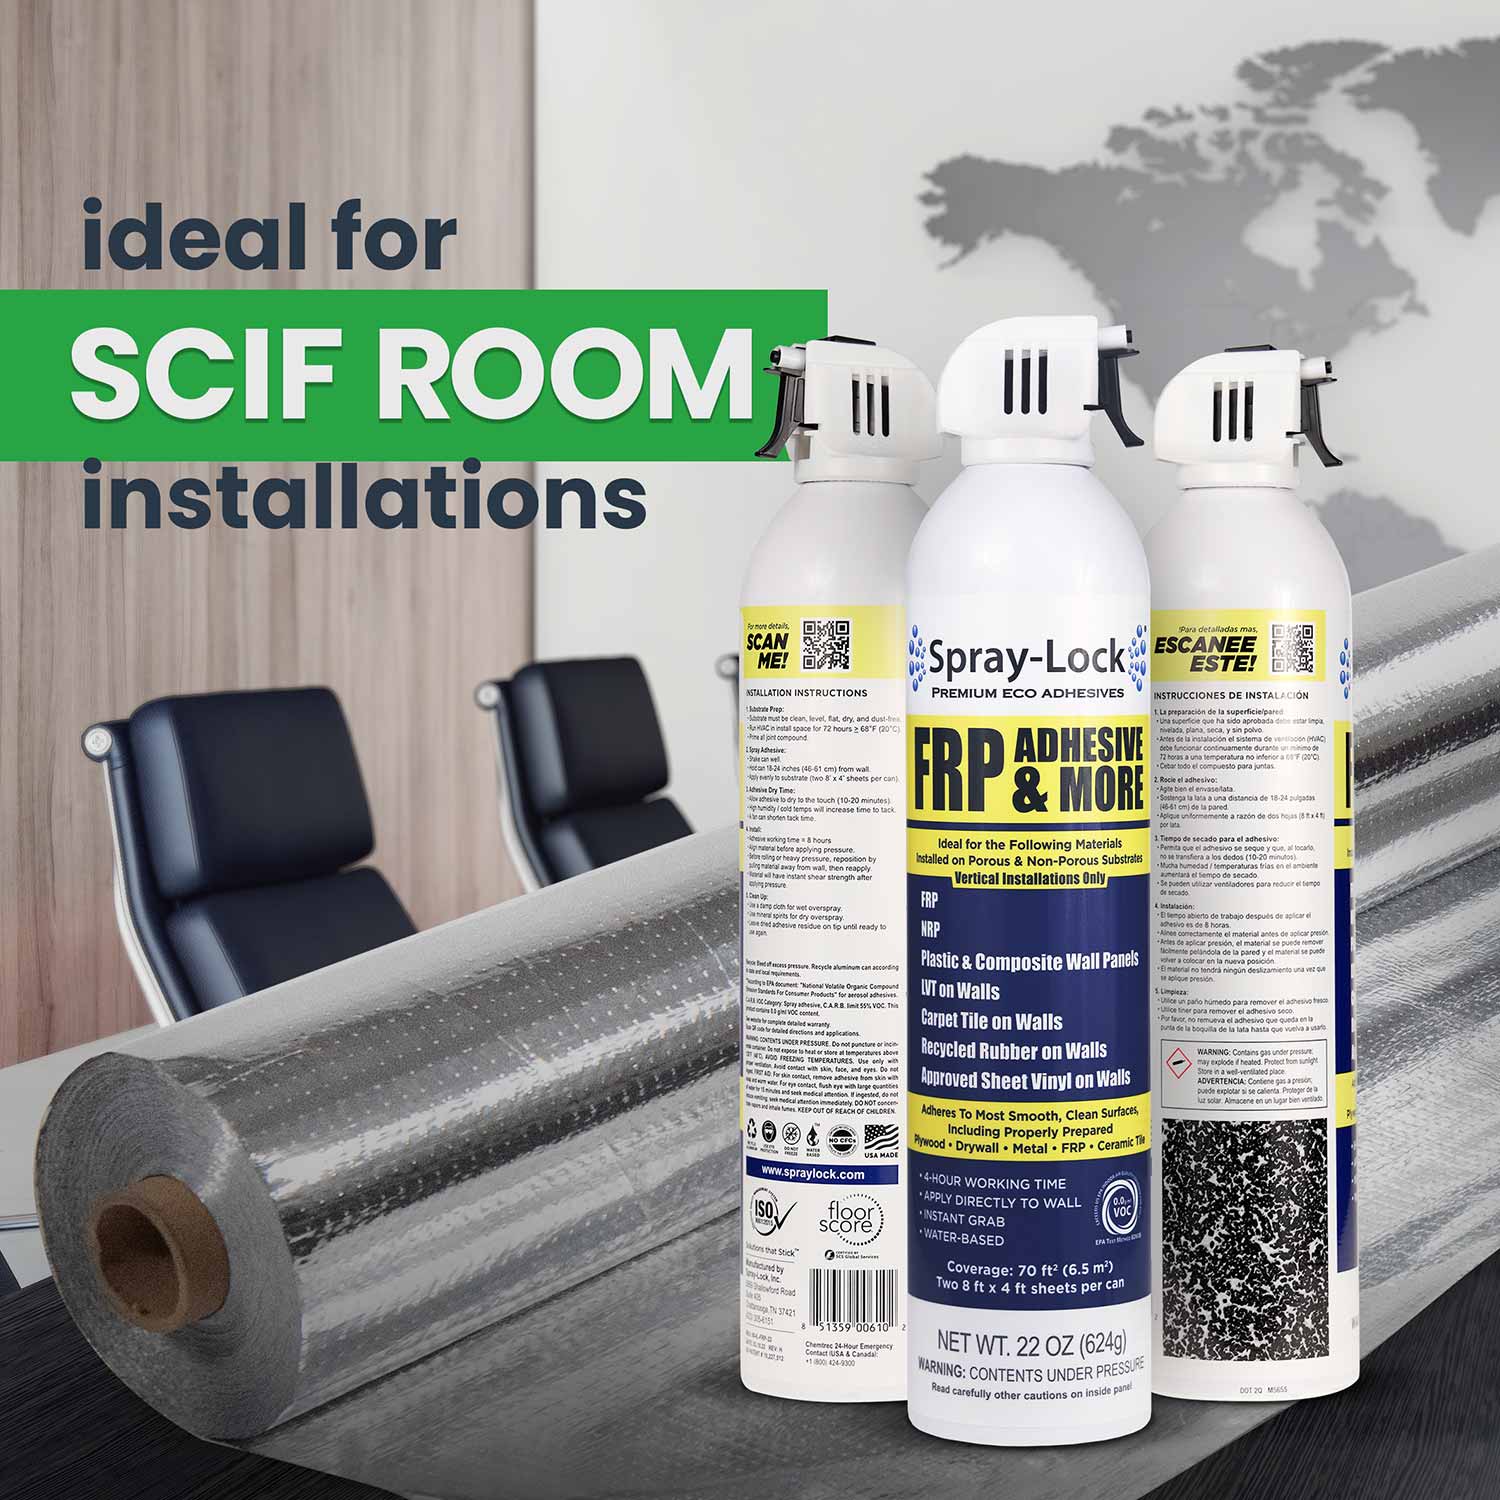 Spray Lock adhesive is ideal for SCIF room installation